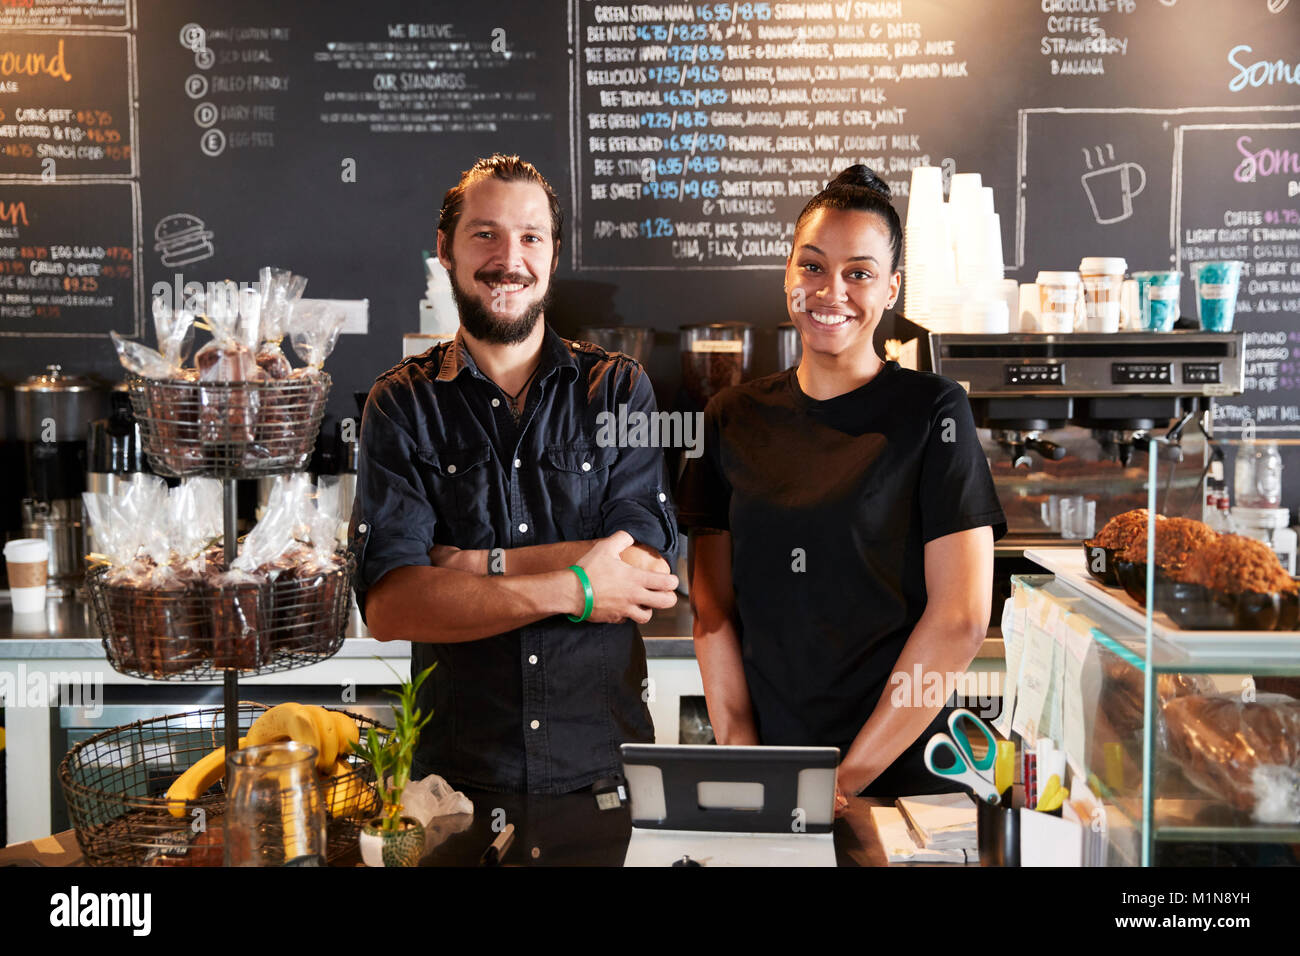 Male And Female Baristas Behind Counter In Coffee Shop Stock Photo